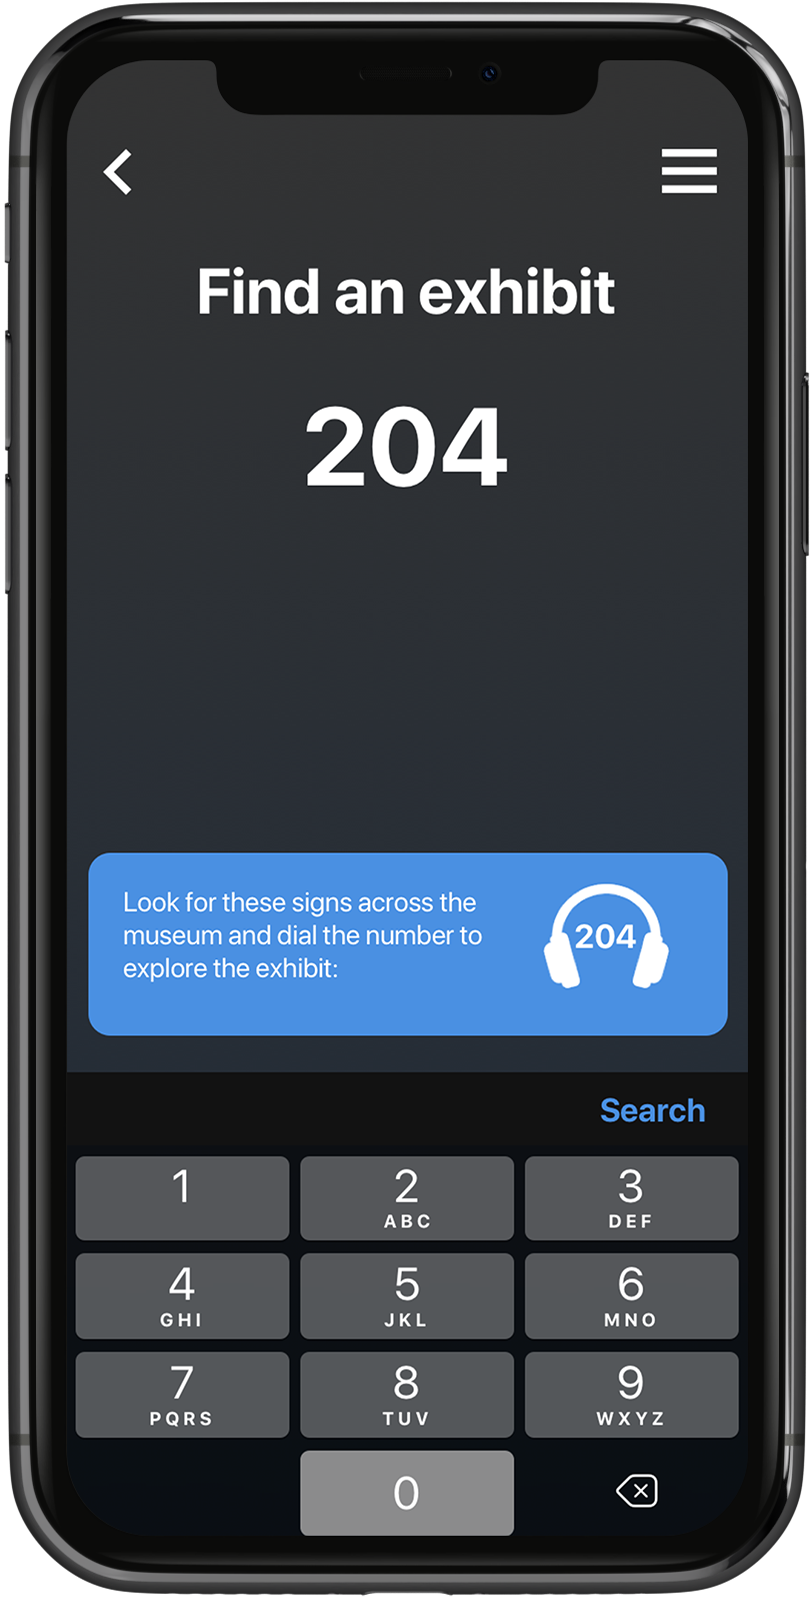 Navigate through hundreds of unique audio stories with the easy-to-use keypad